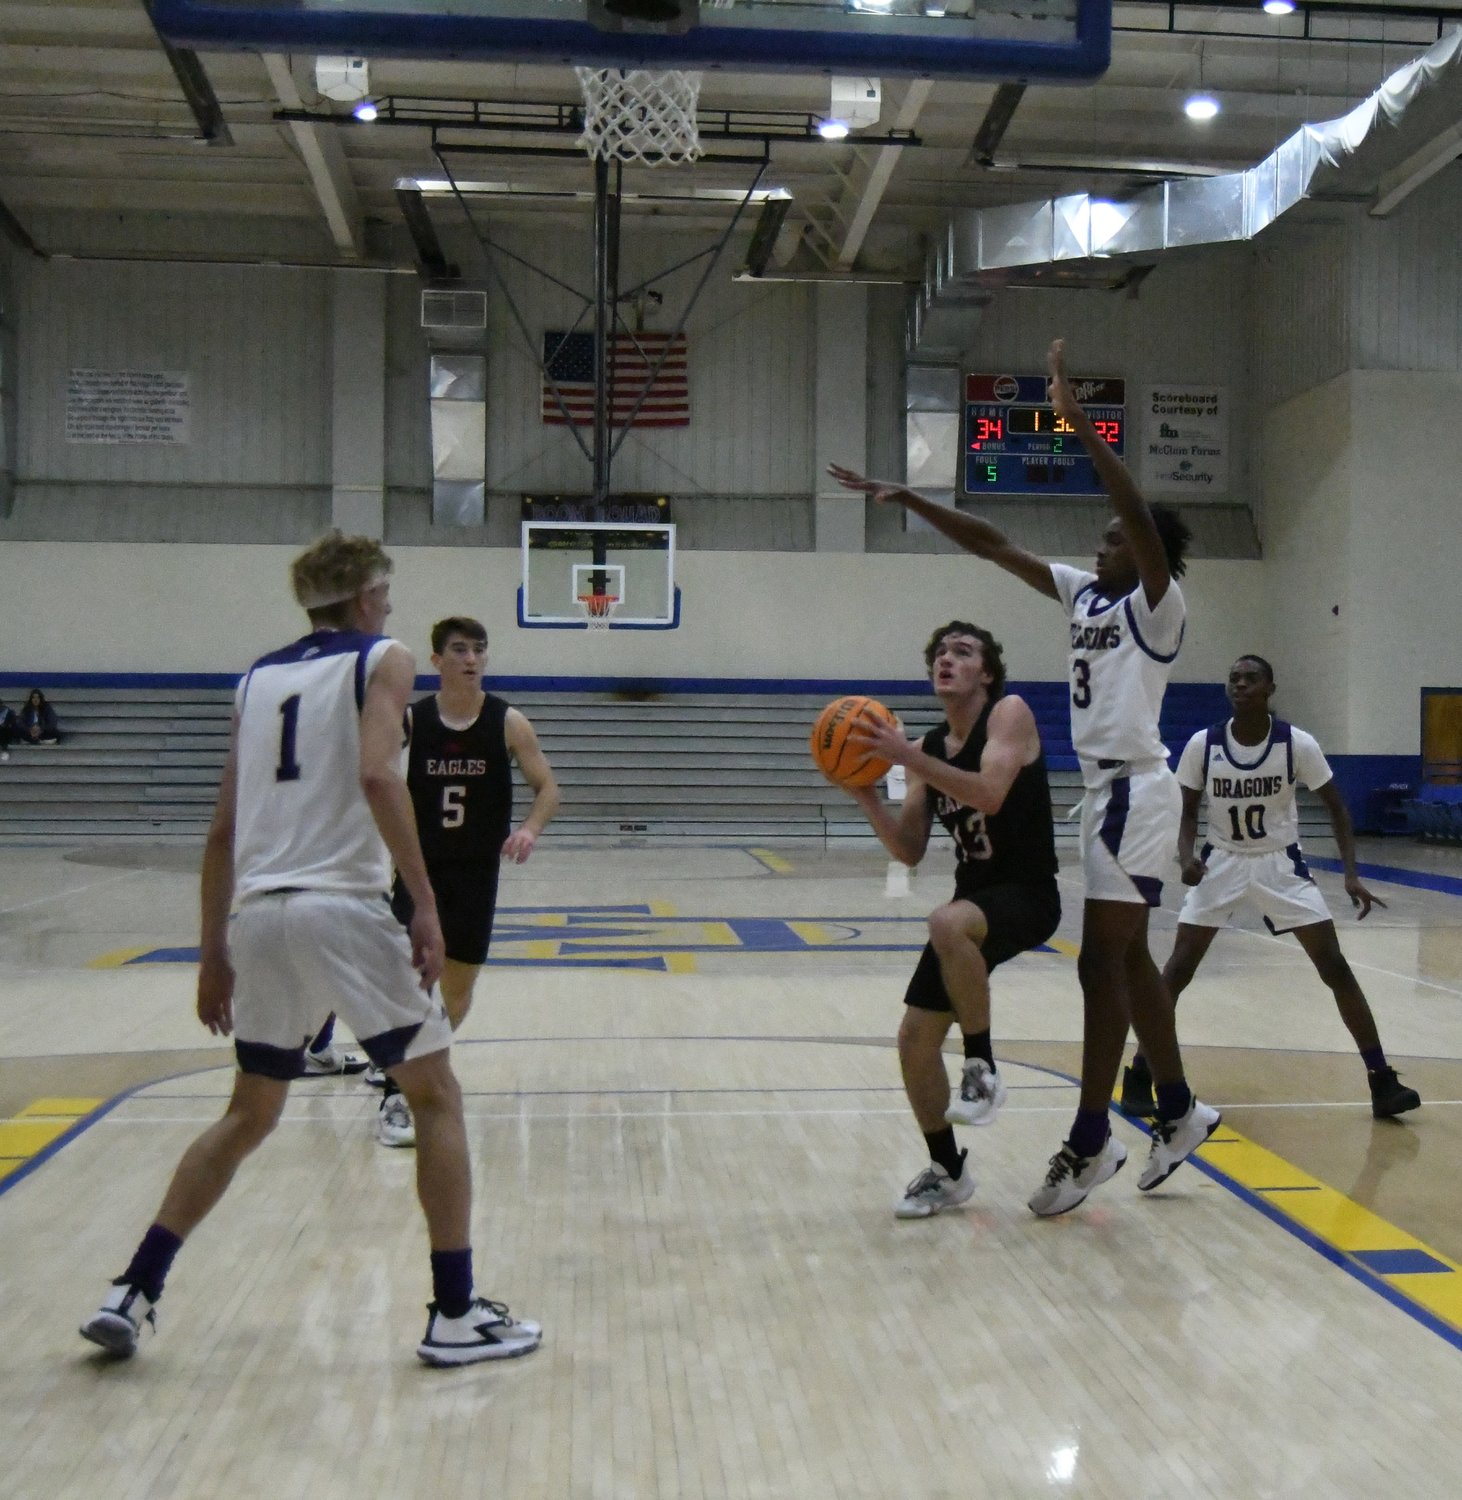 An image from the Mountain Home Christian Academy-Junction City senior boys game played Wednesday in the Ultimate Auto Group Invitational at The Hangar.